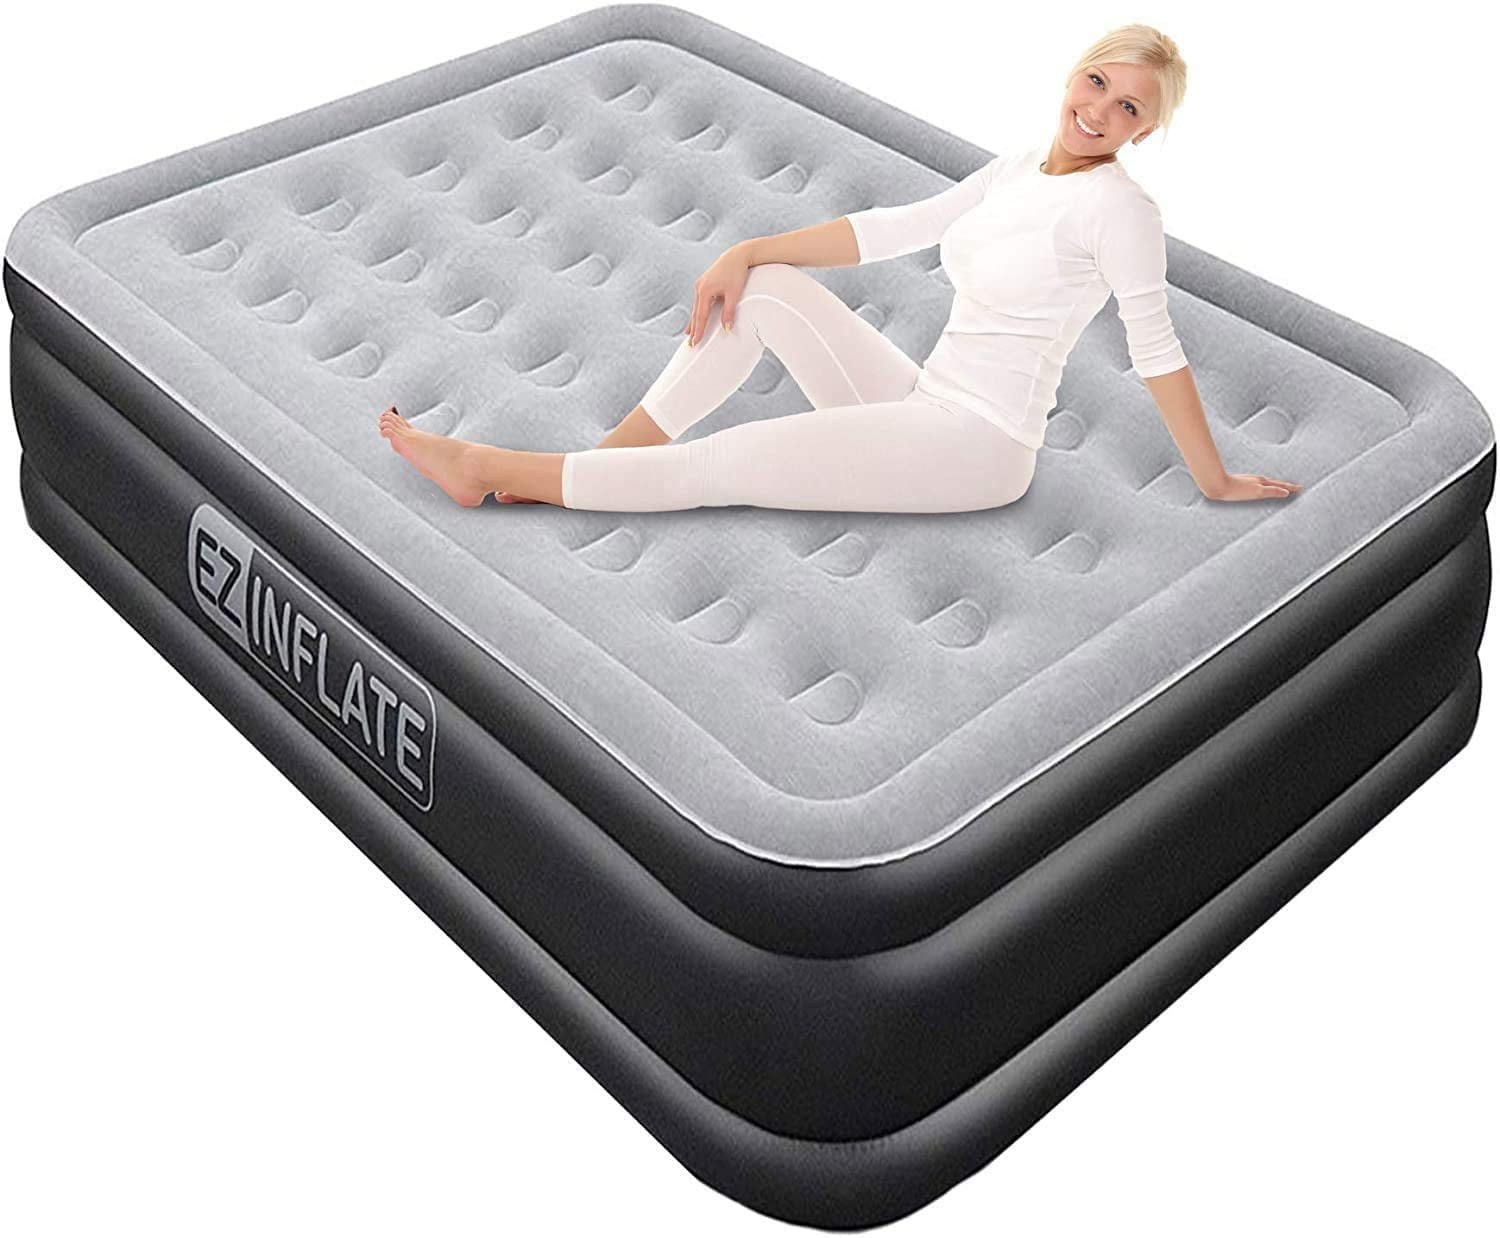 Queen Size Inflatable Air Bed Mattress Built In Electric Pump Camping Hiking 13" 